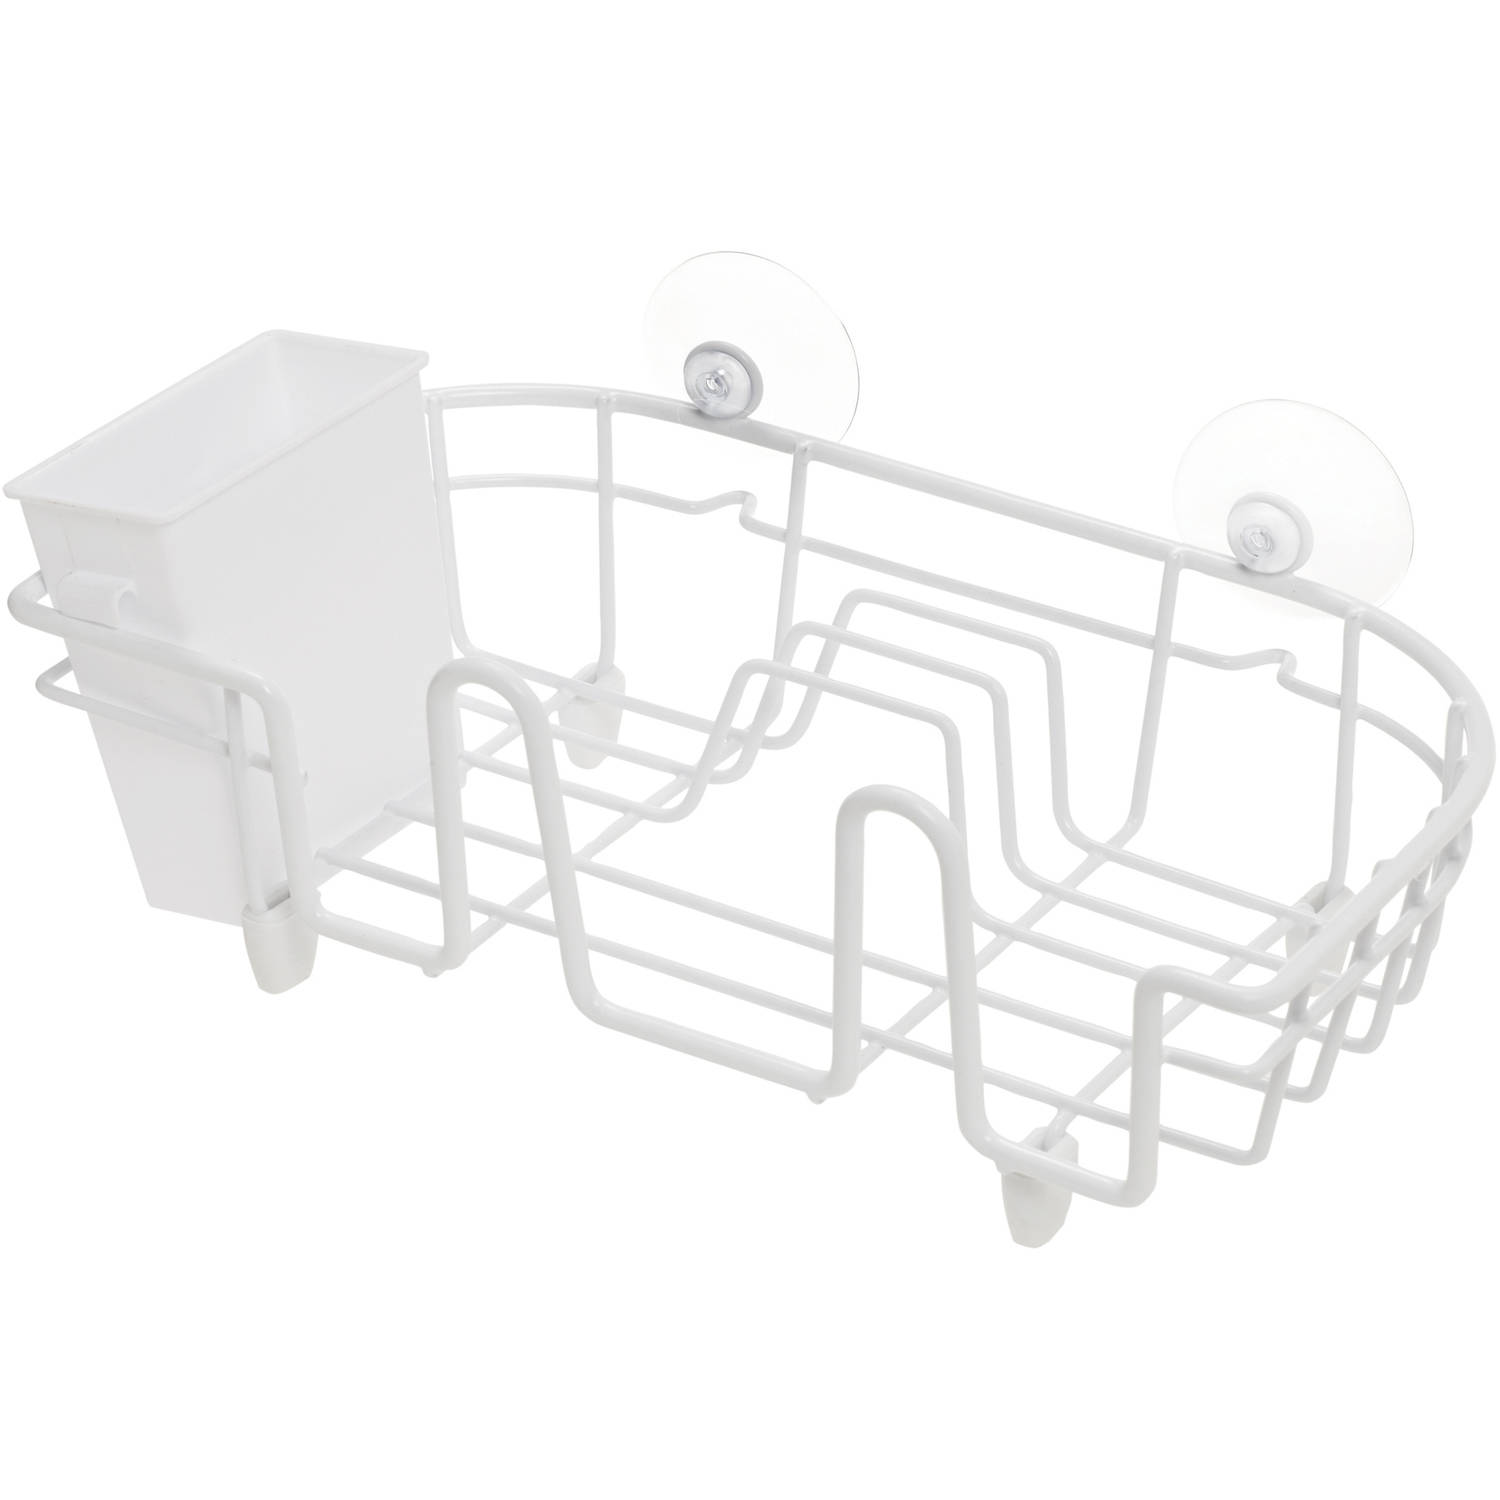 White In-Sink Compact Dish Drainer Sinc Drying Tray Rack Kitchen Drainboard